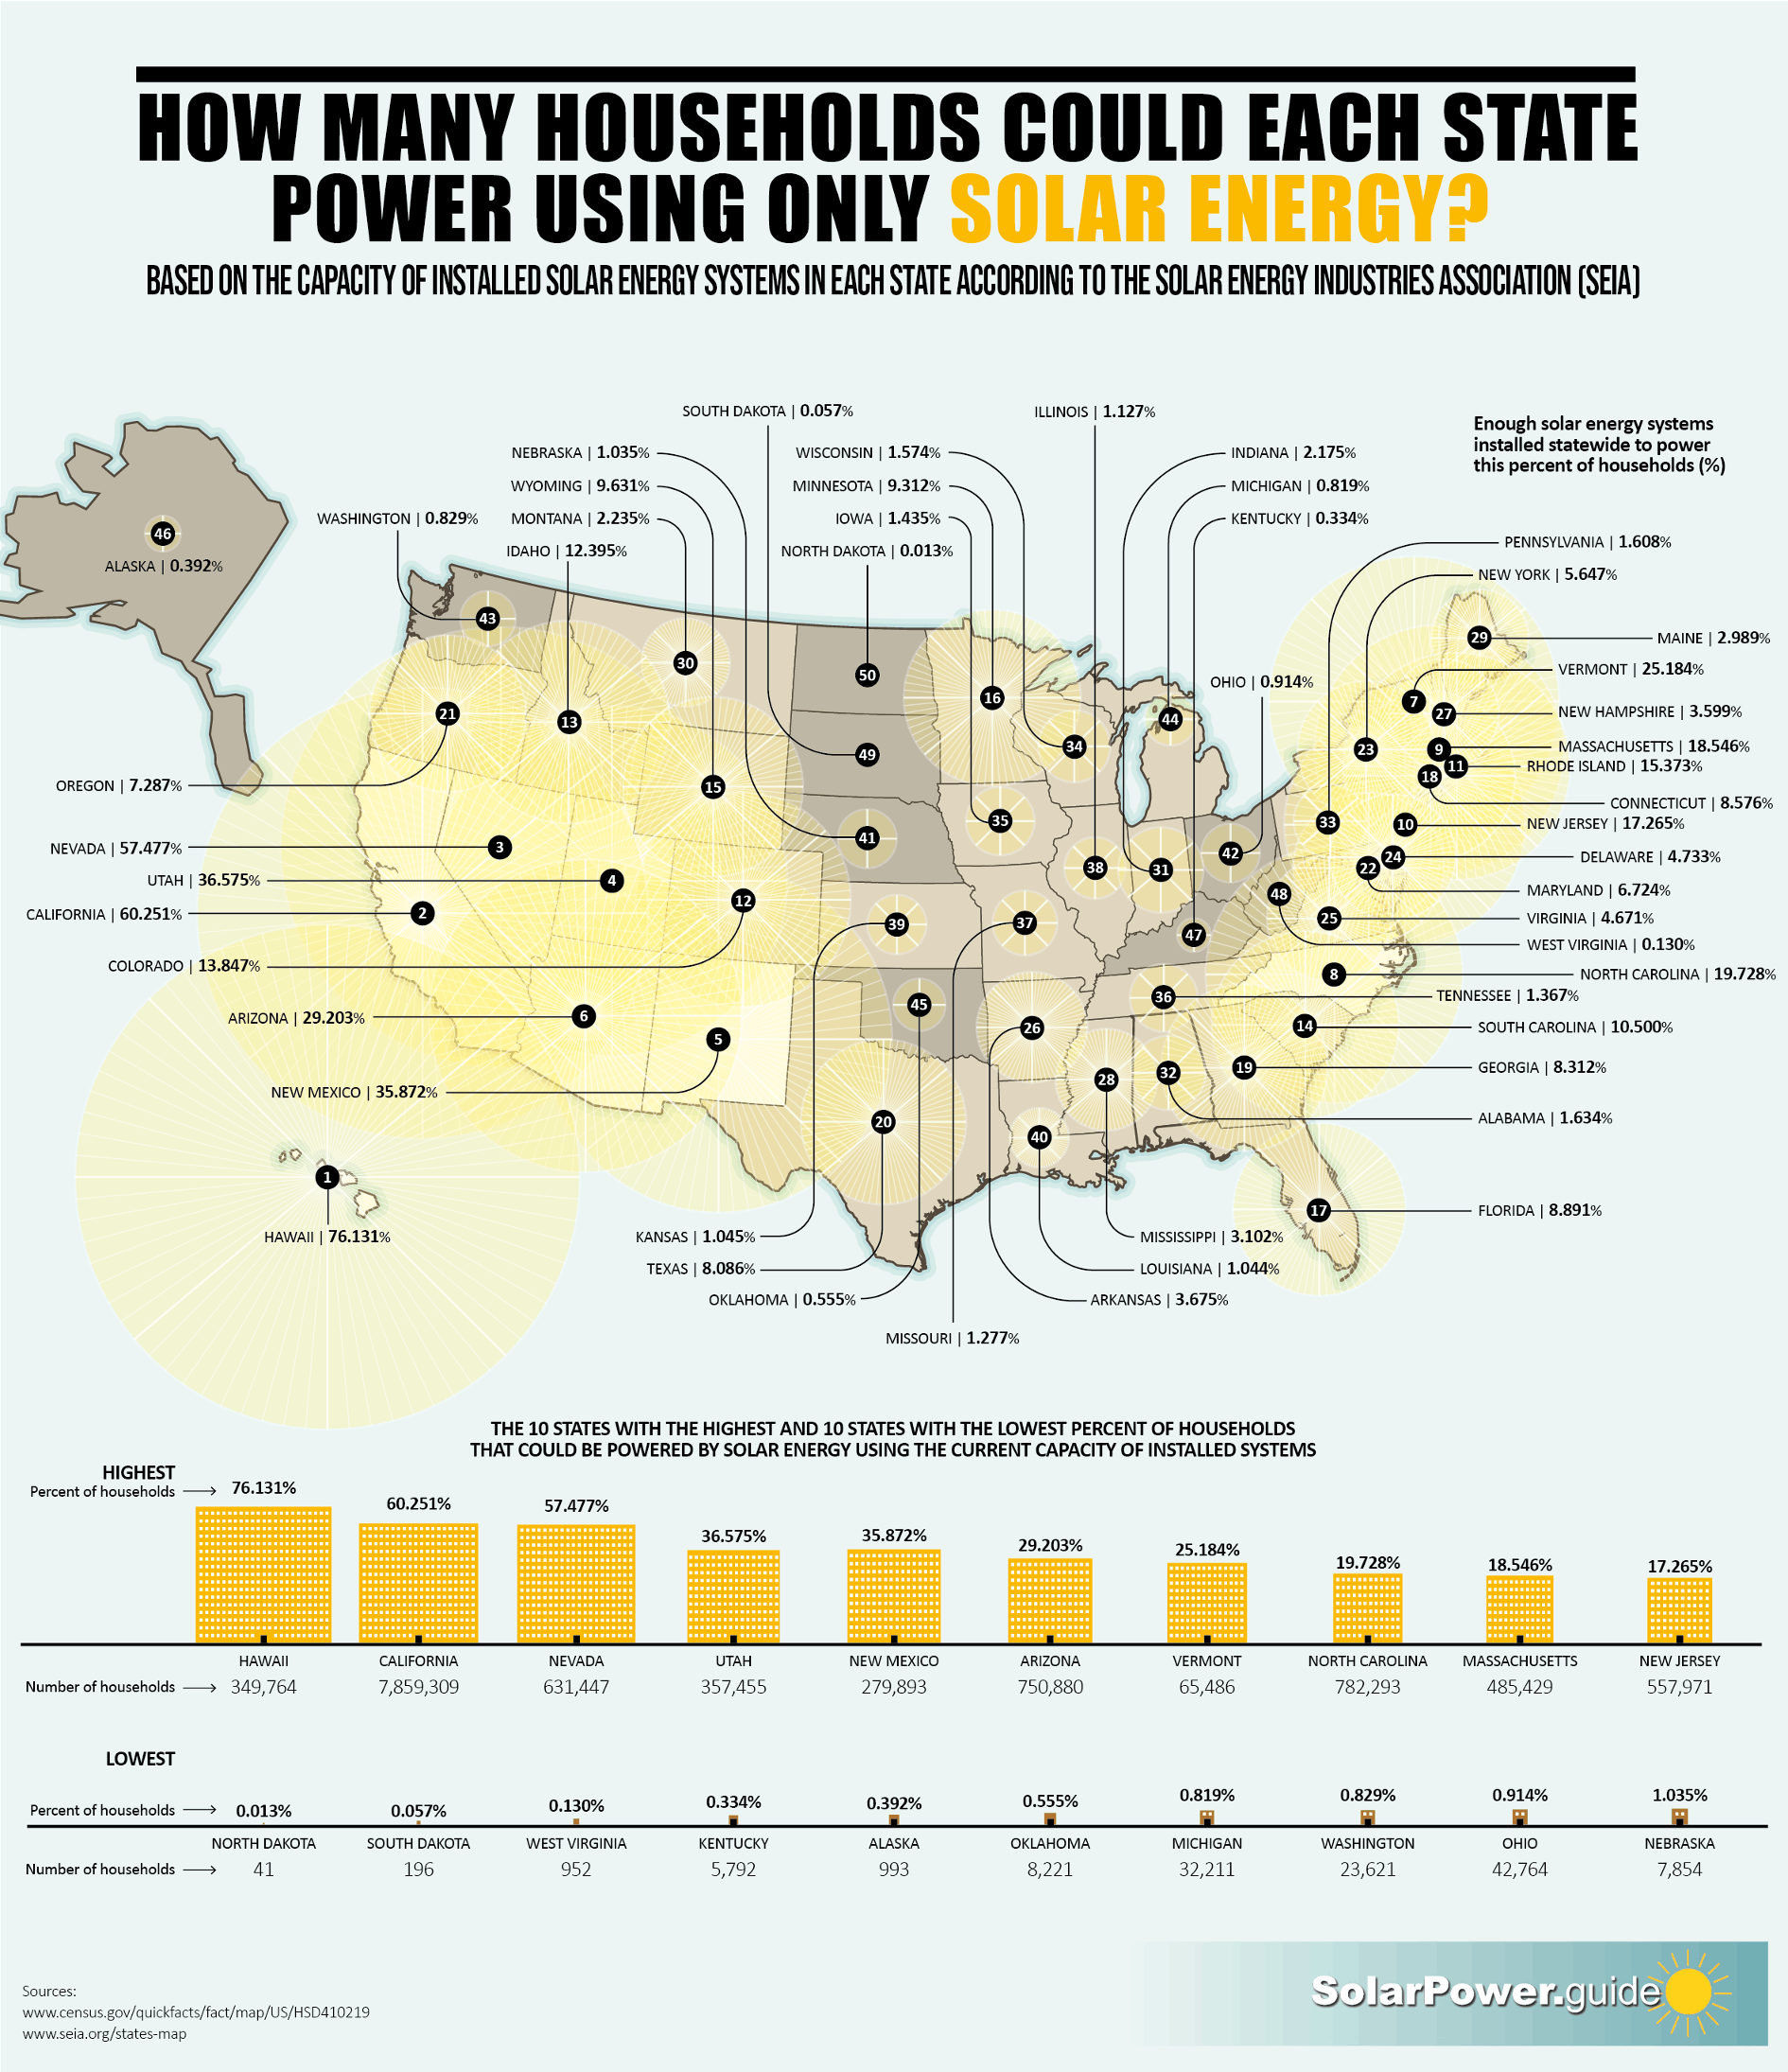 The Number of Households Each State Could Power Using Only Solar Energy